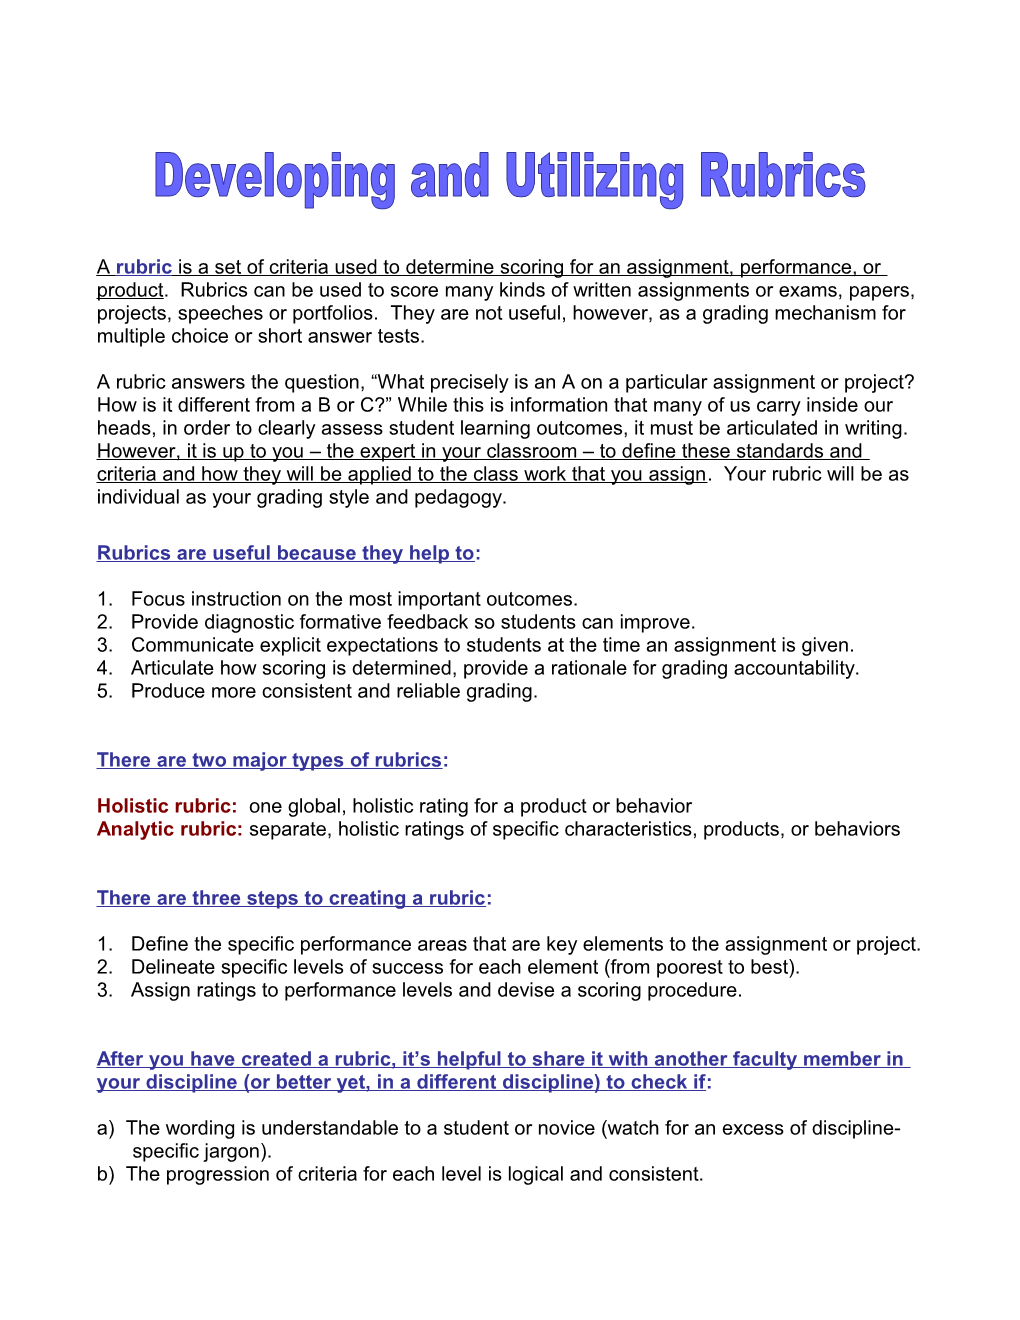 Rubrics Are Useful Because They Help To